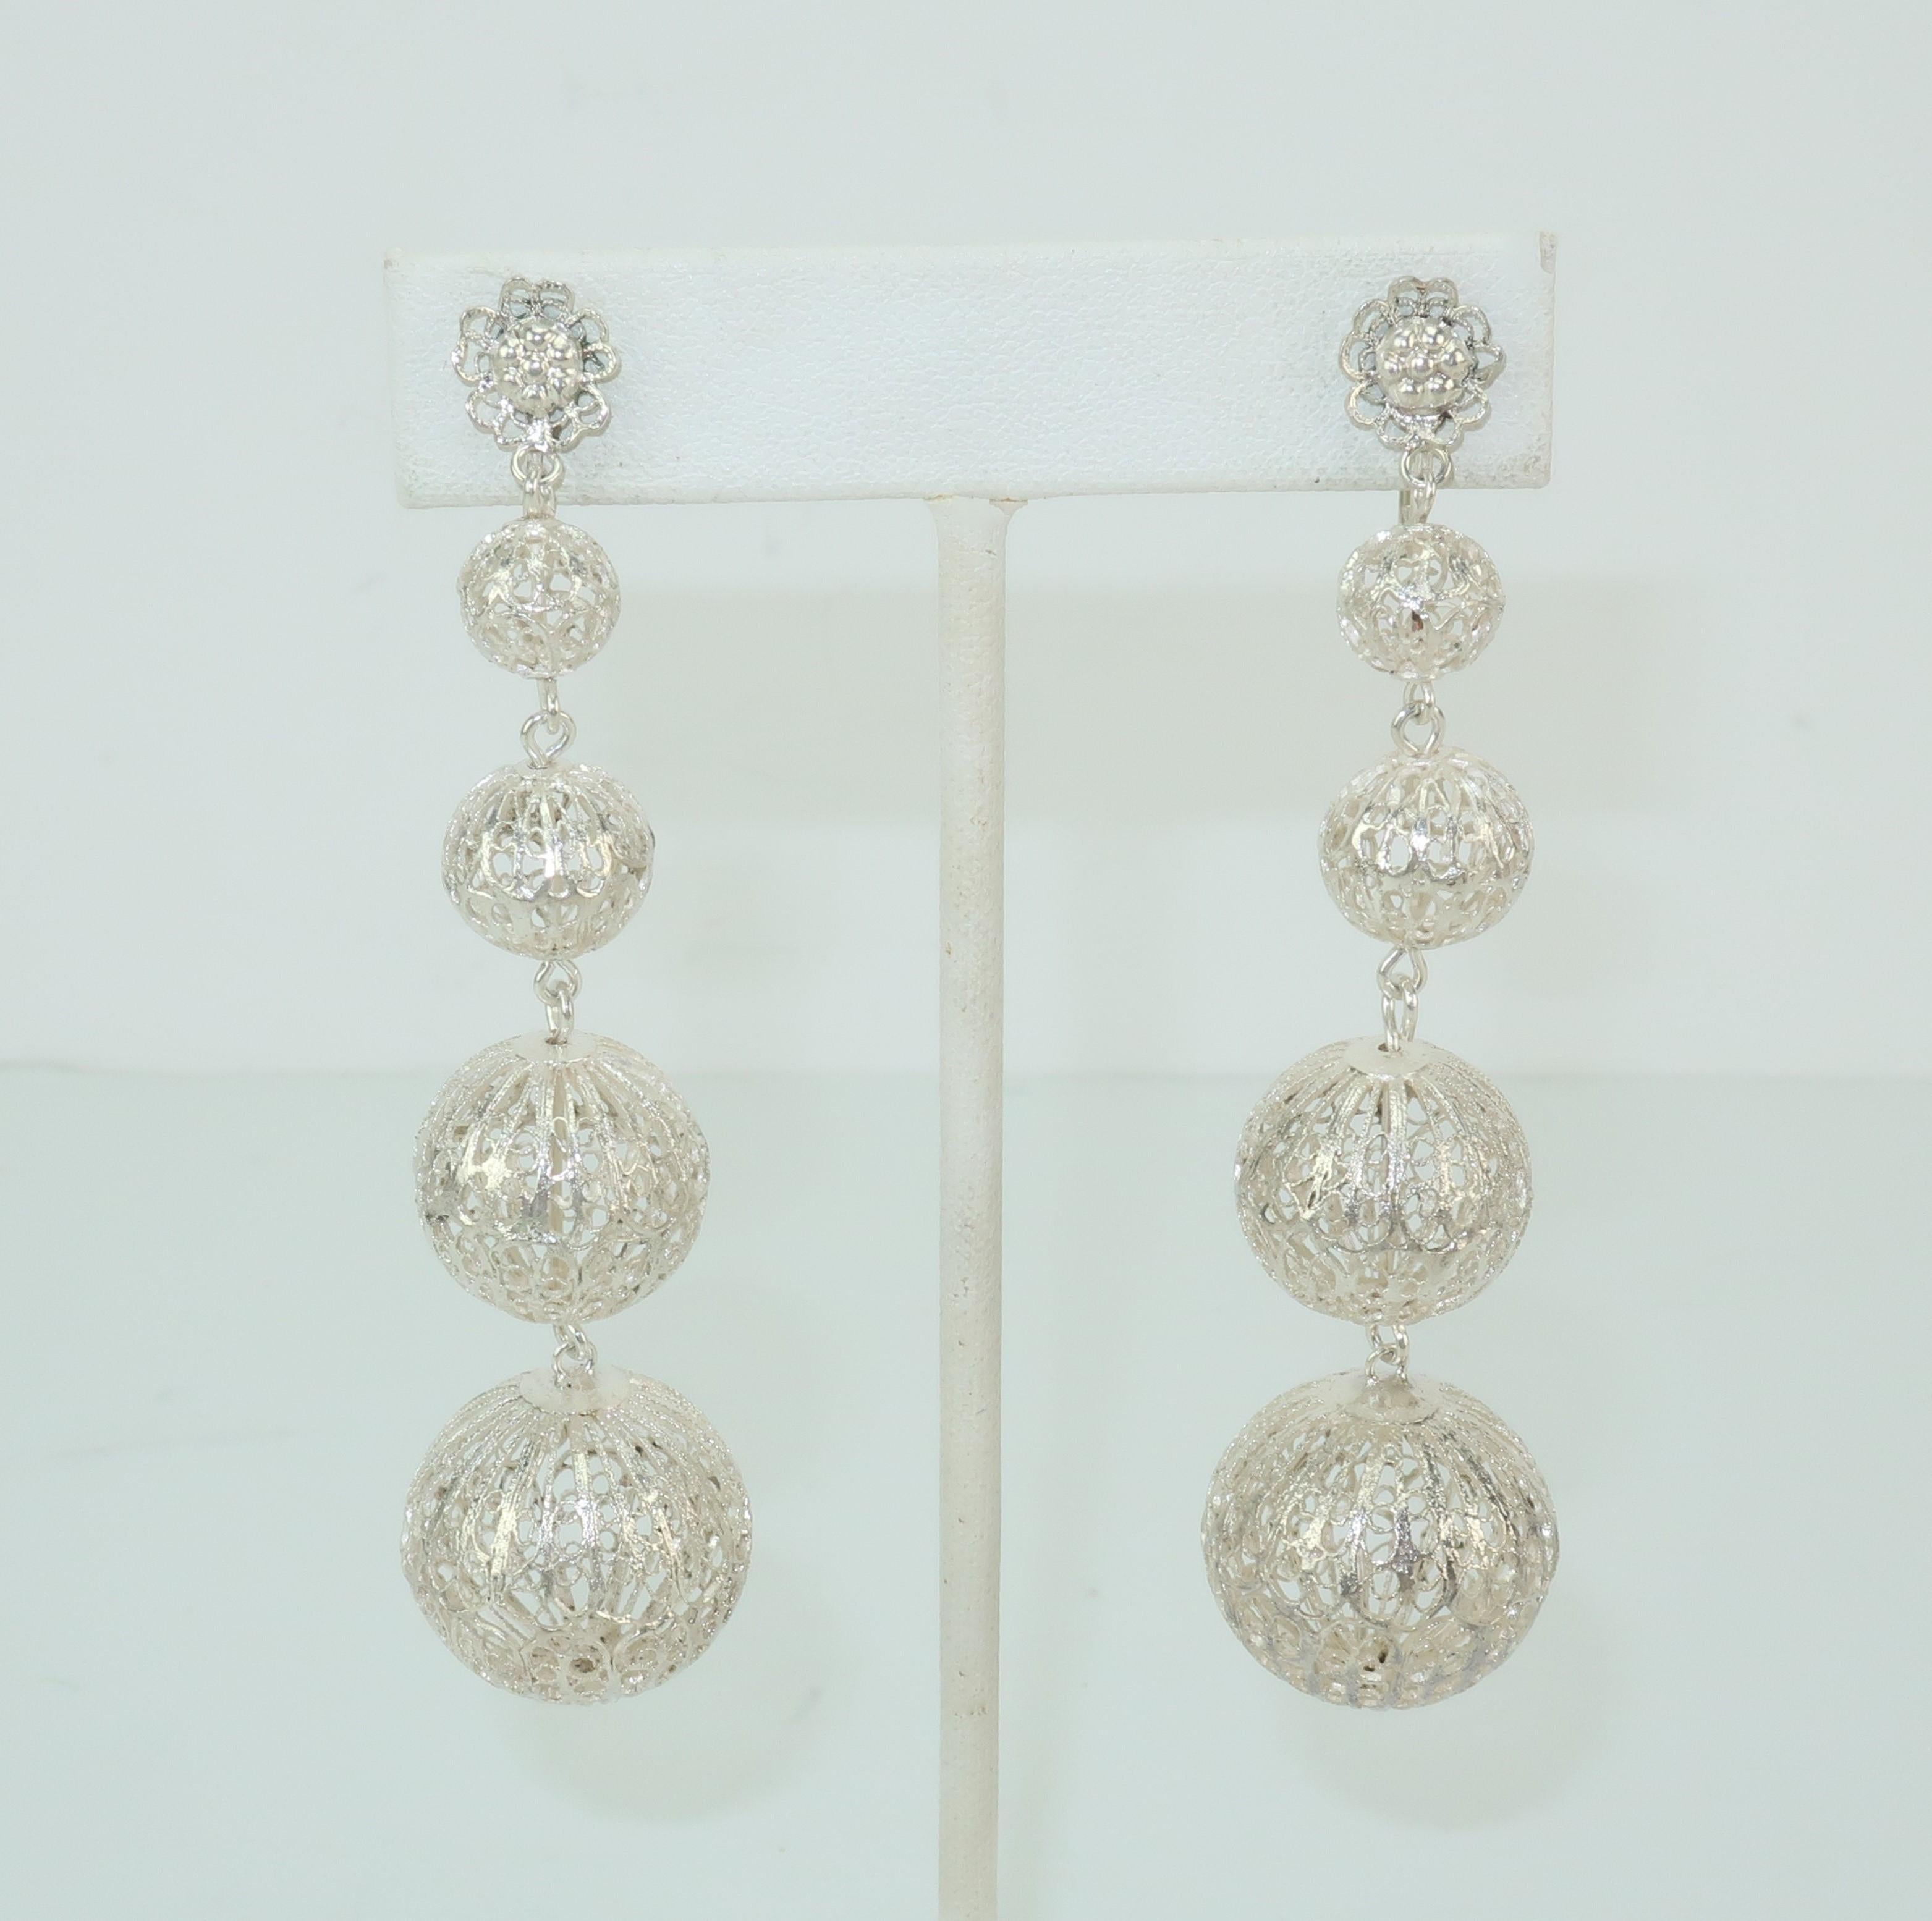 These vintage silver metal earrings are delicate and light as a feather but pack a visual punch.  The four graduated orbs are an intricate filigree design attached to a floral shaped base with screwback closures.  They are not hallmarked though they